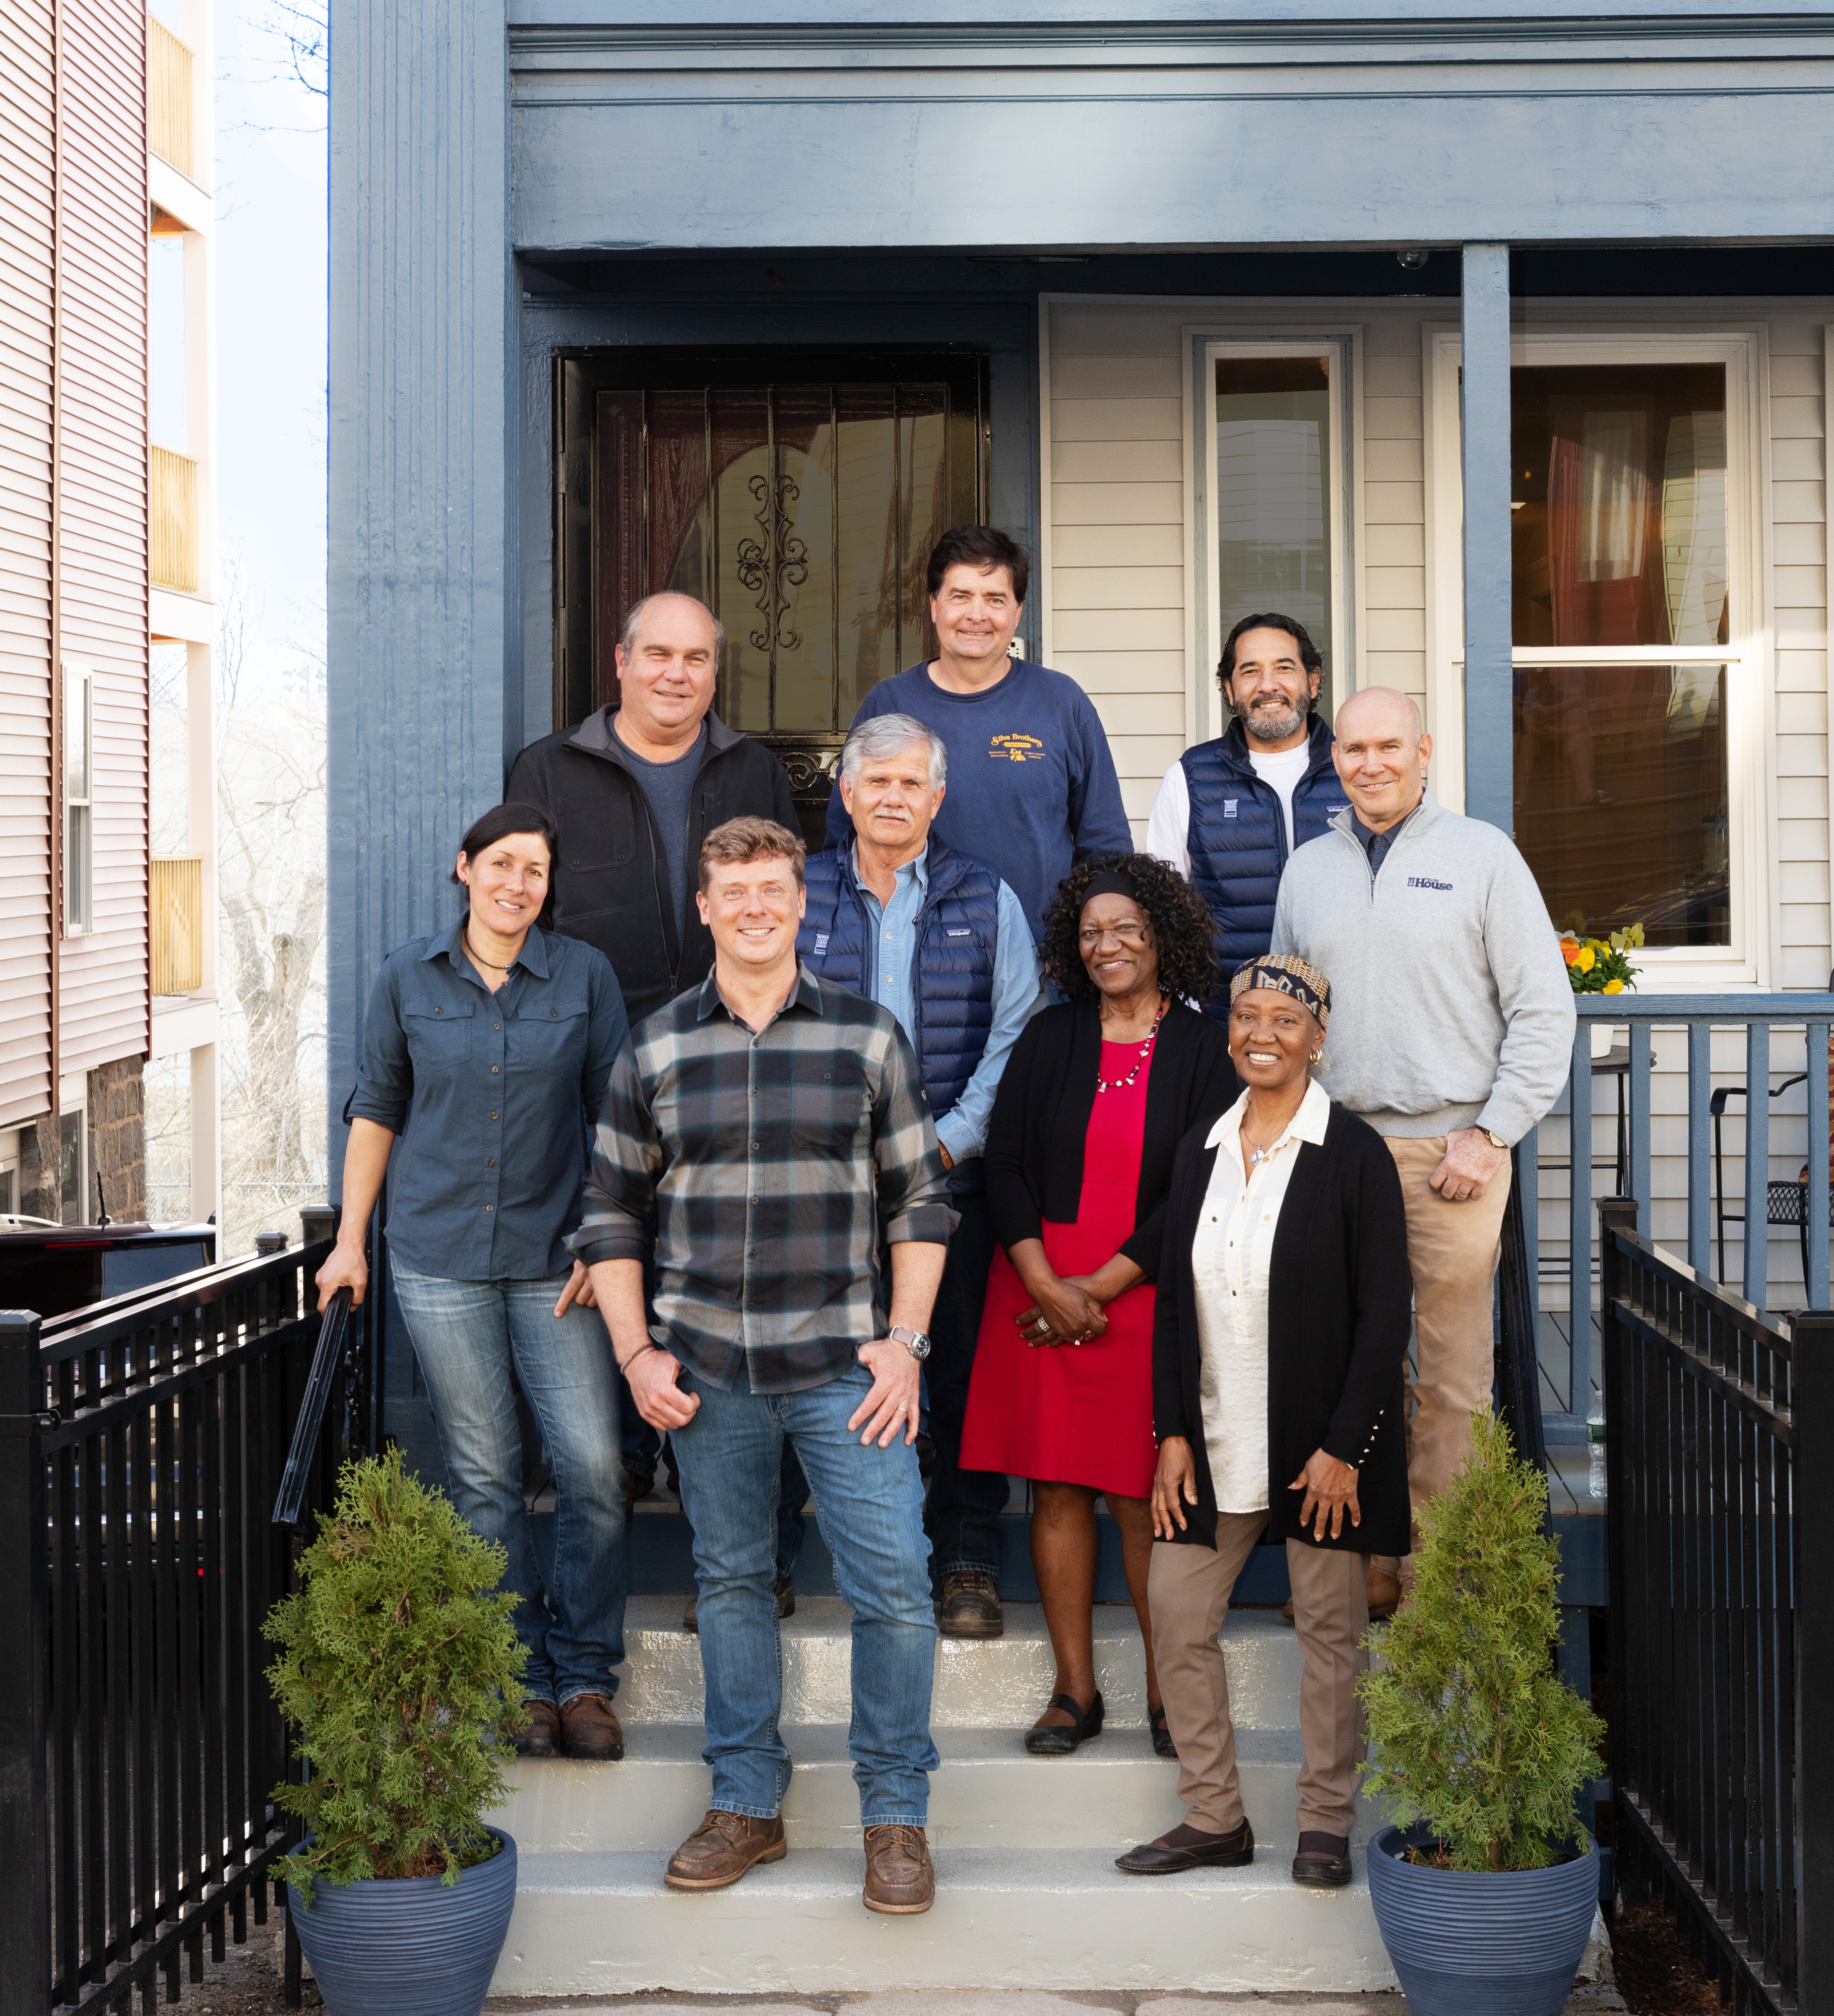 Fall 2021, Dorchester reveal, TOH crew and homeowners in front